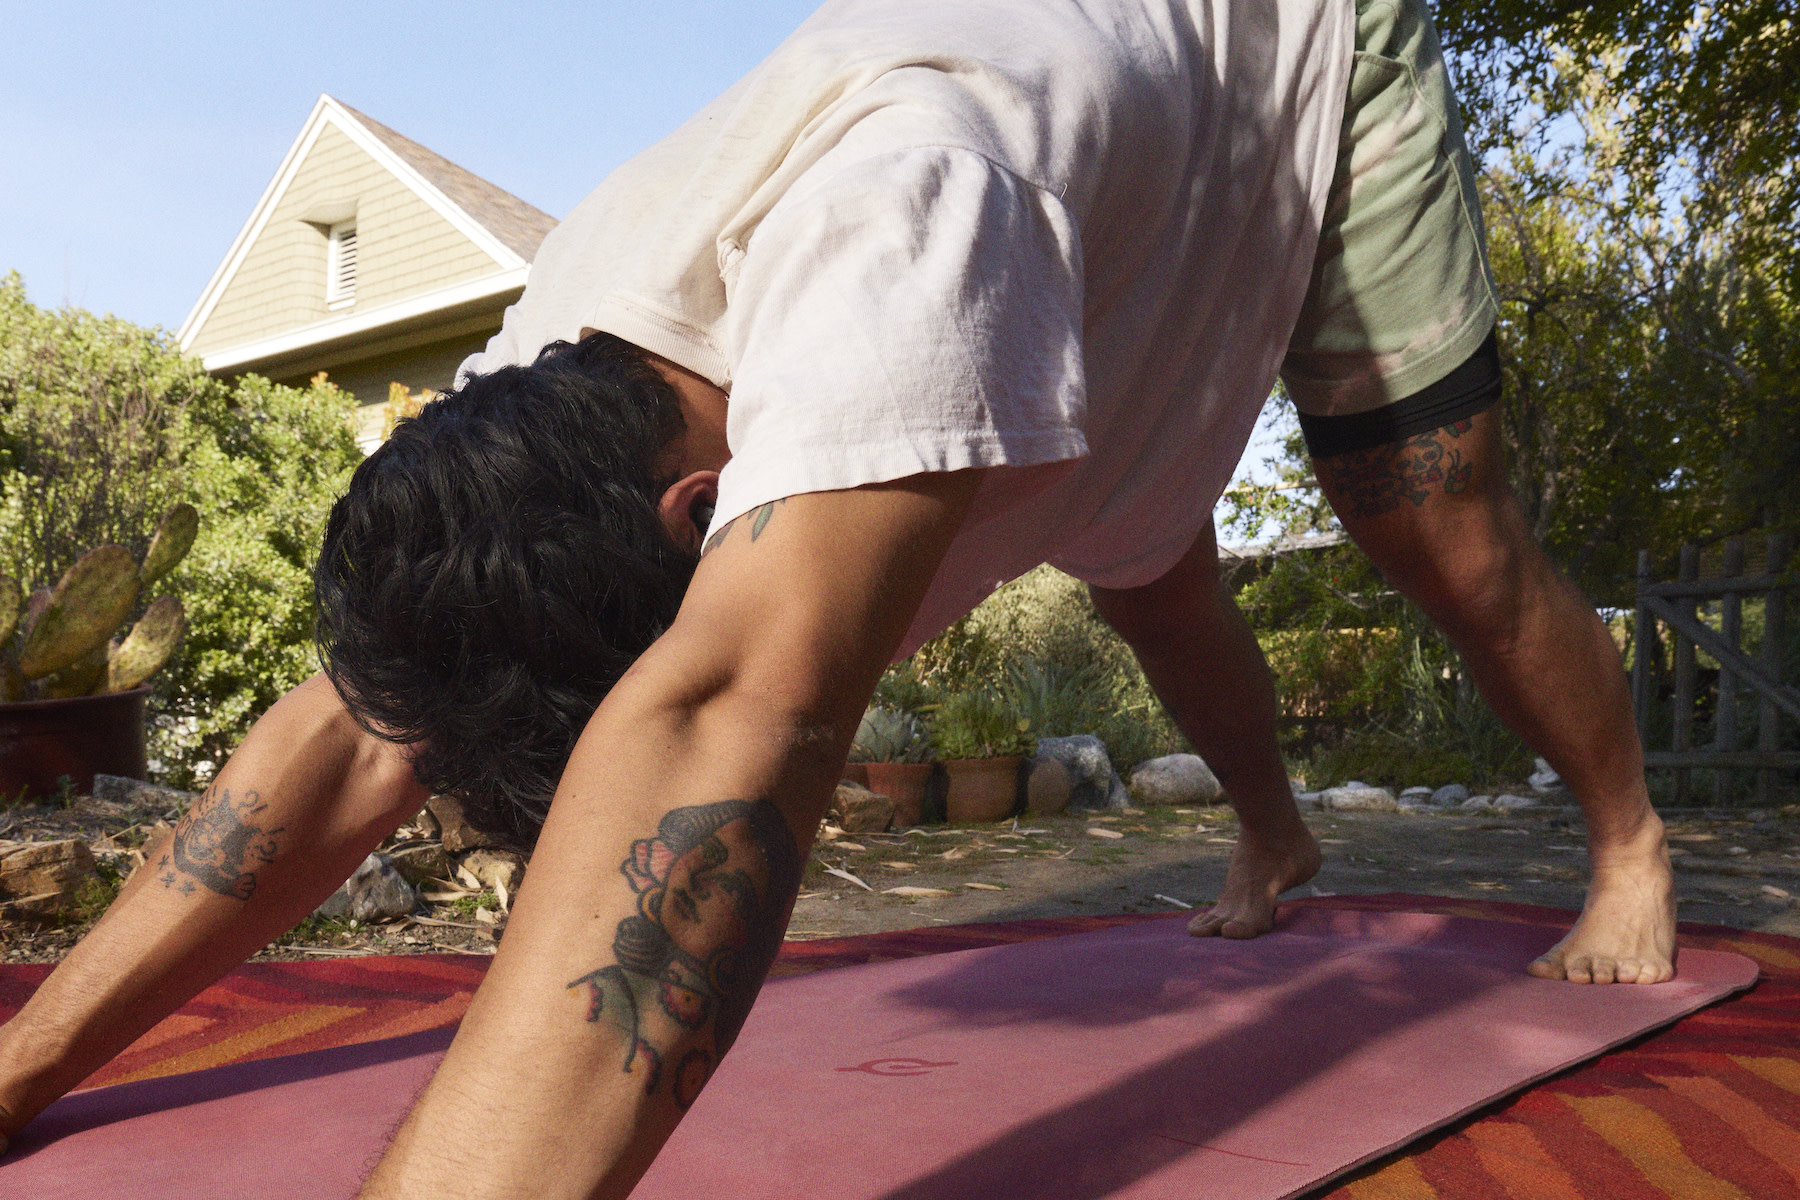 A man in Downward Dog pose on a clean yoga mat.